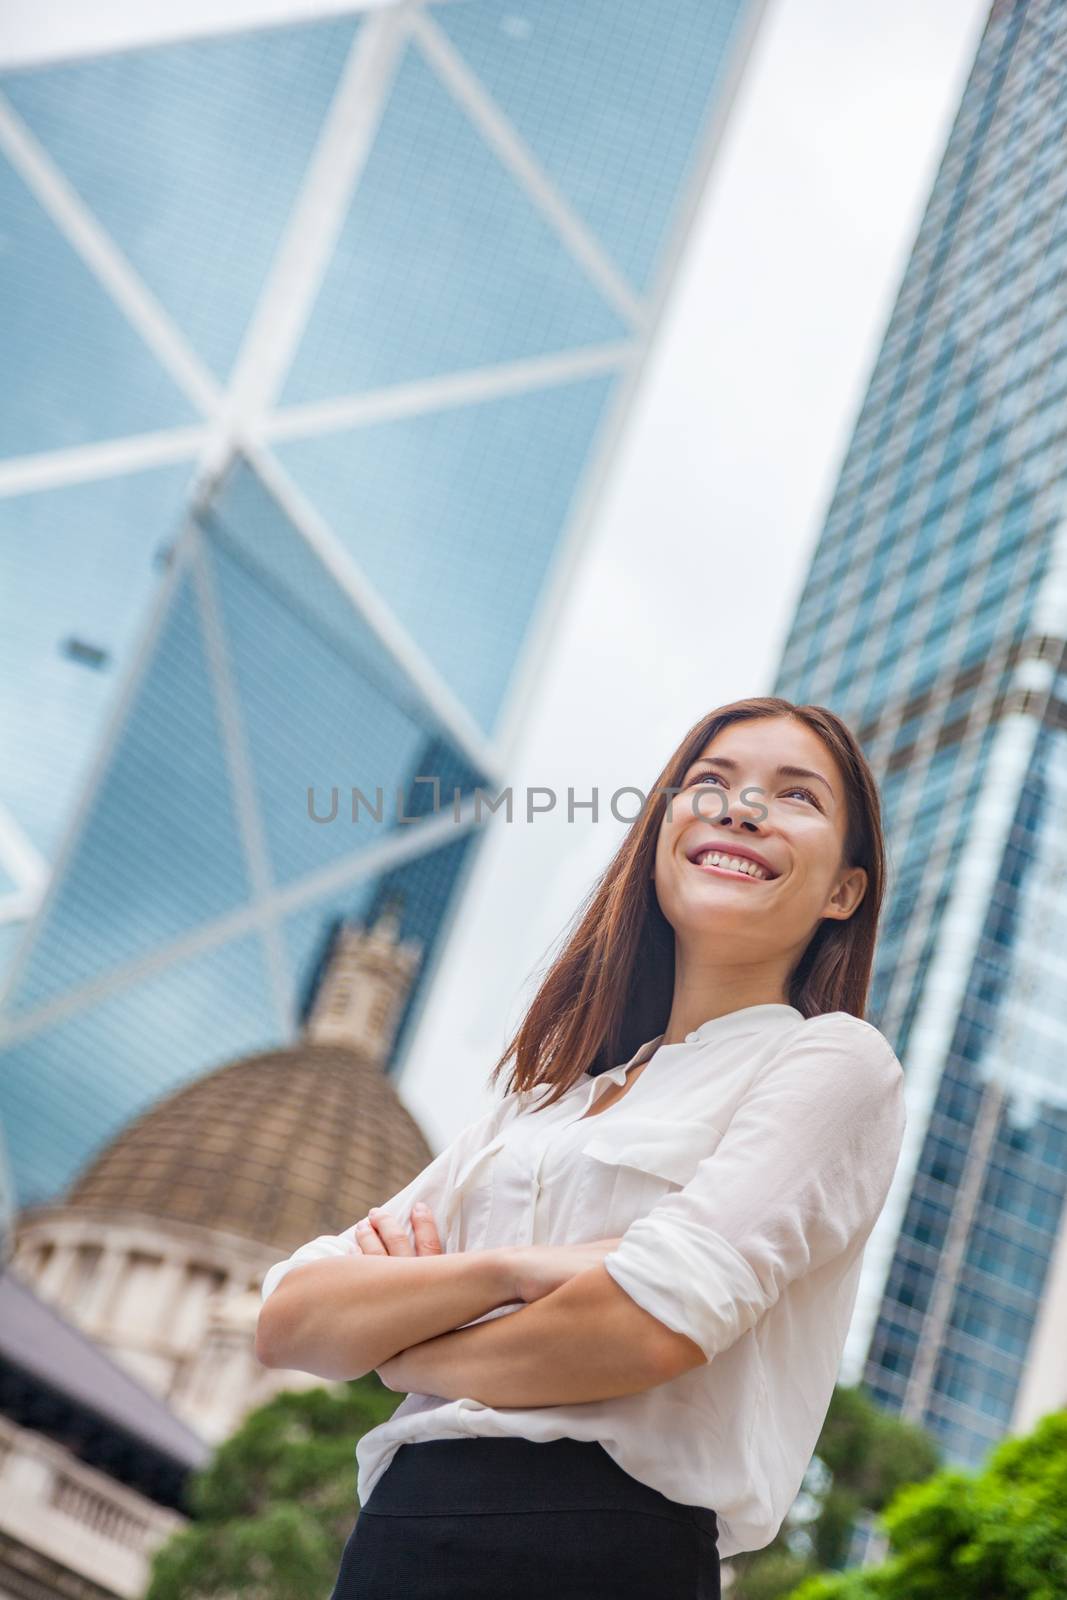 Asian business woman confident in Hong Kong. Businesswoman standing outdoor looking up in hope for future career with city background. Young multiracial Chinese Caucasian professional in Hong Kong.